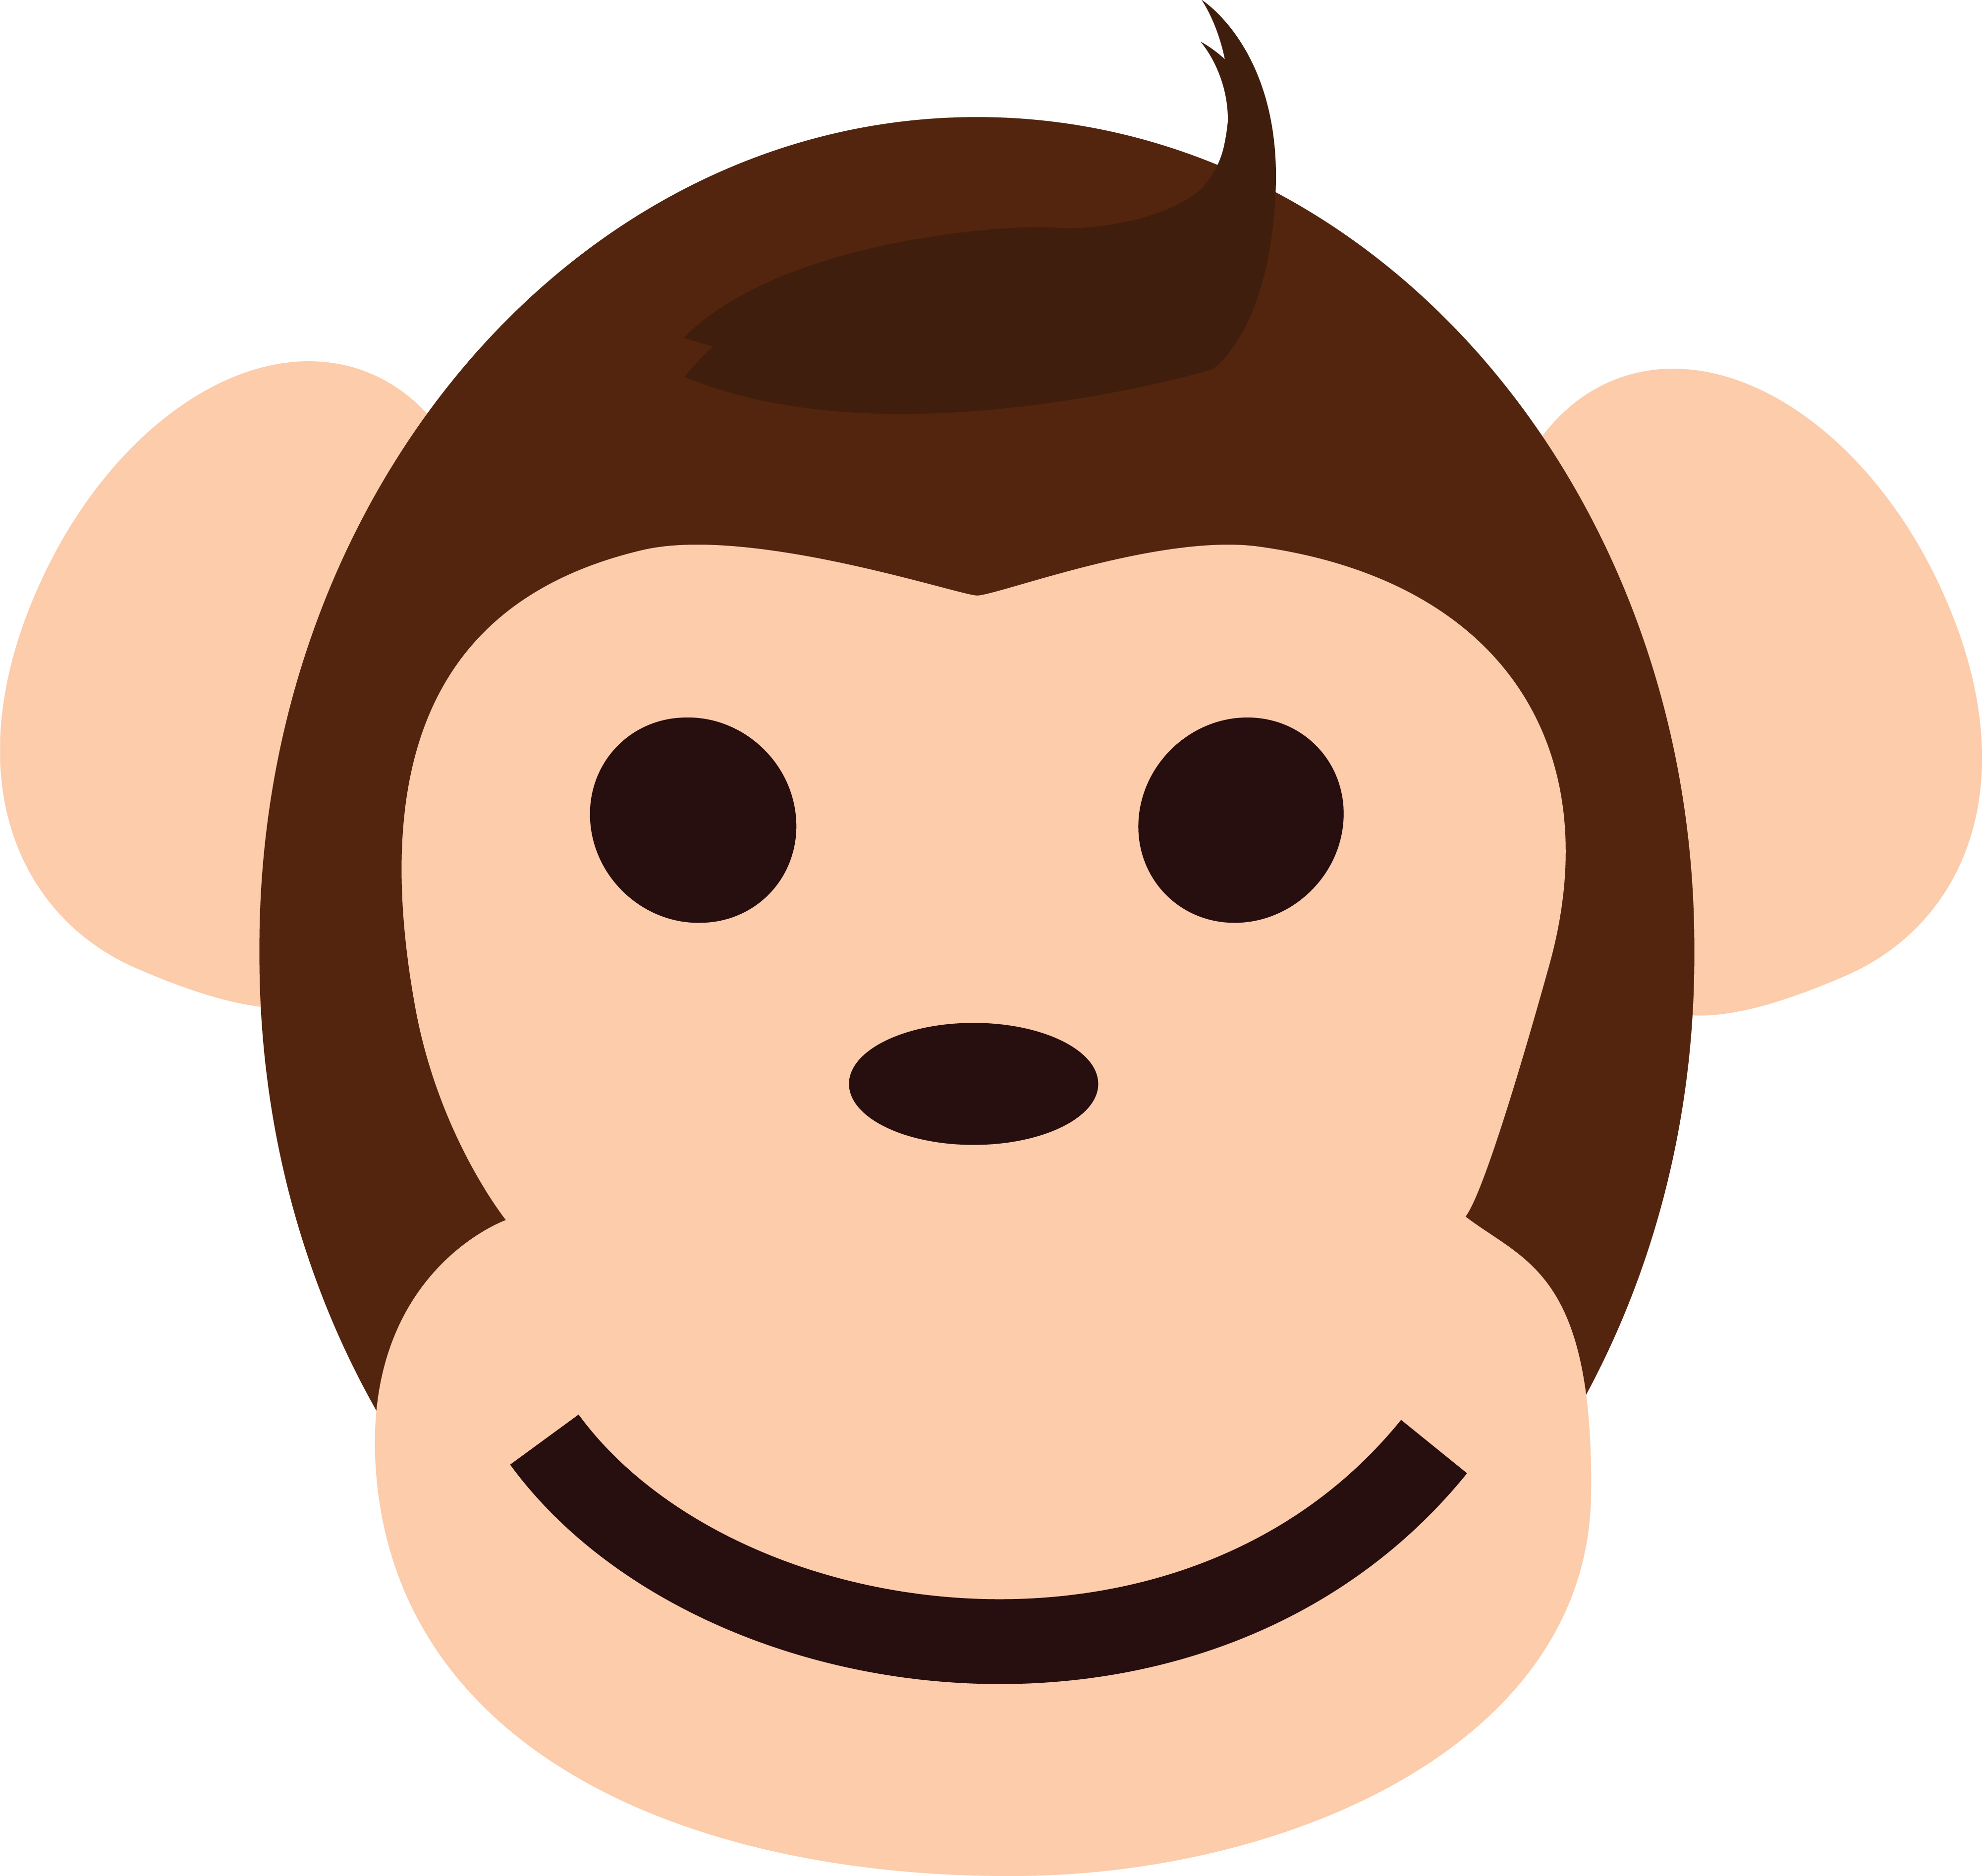 Monkey Face Clipart this imag